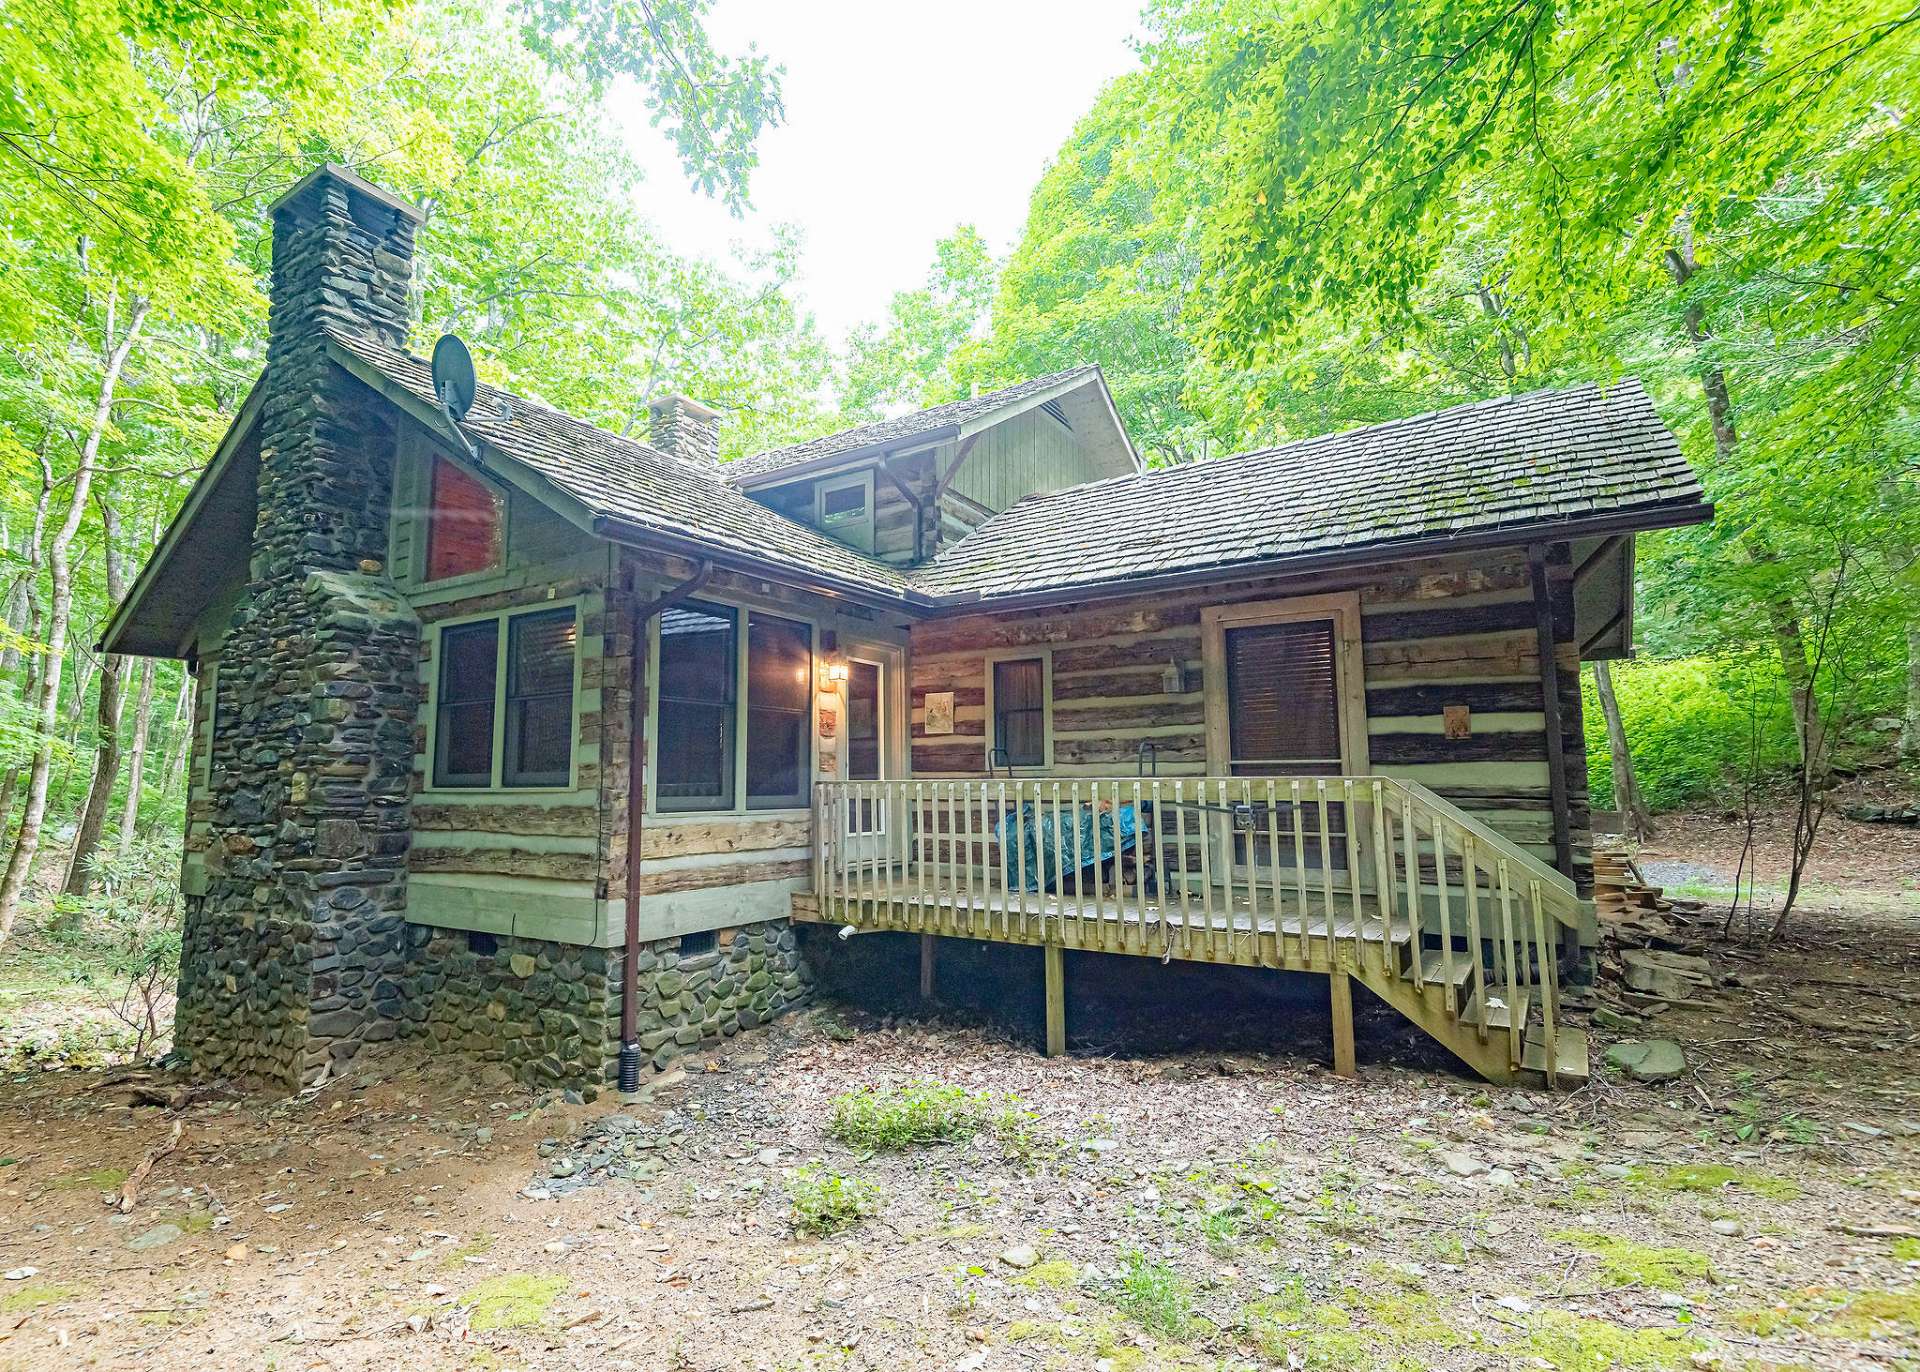 There is also, an open deck area in the back to enjoy the wooded setting and the creek.